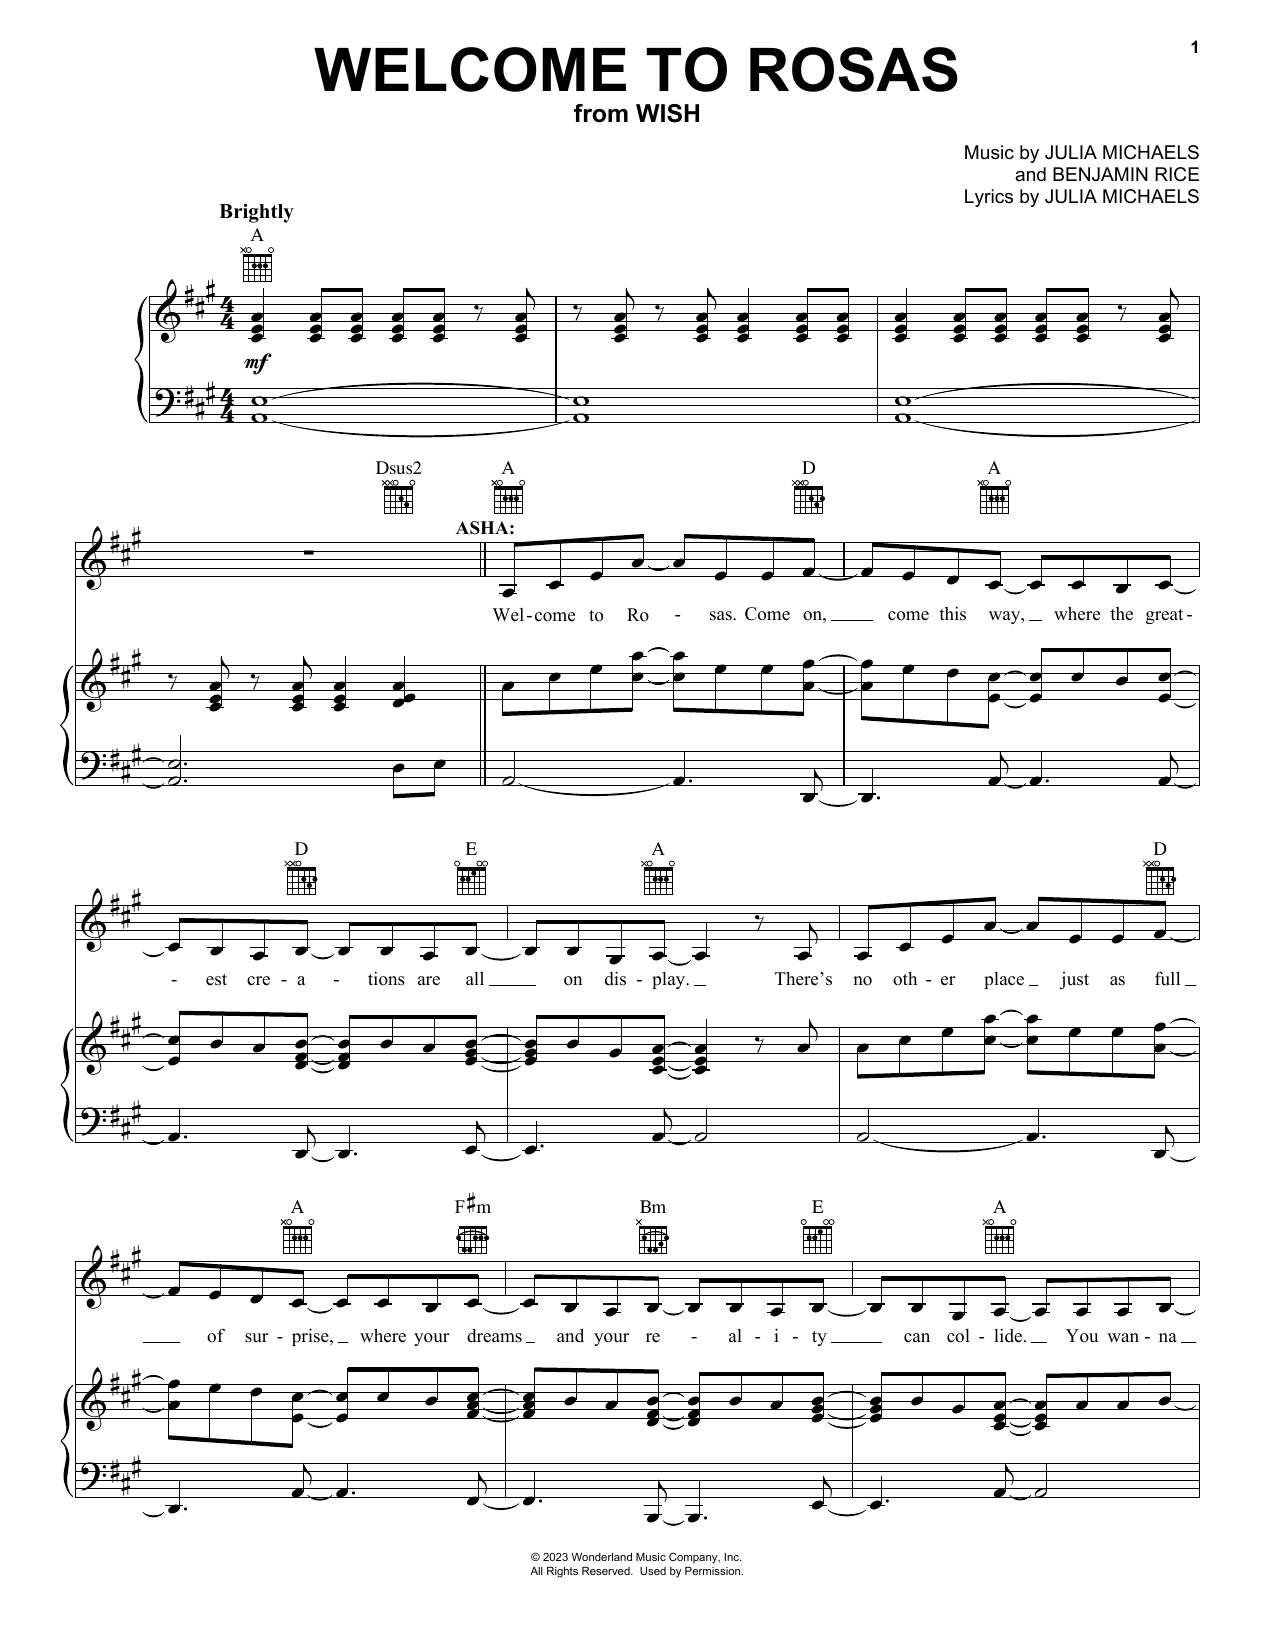 Ariana DeBose and The Cast Of Wish Welcome to Rosas (from Wish) sheet music notes printable PDF score